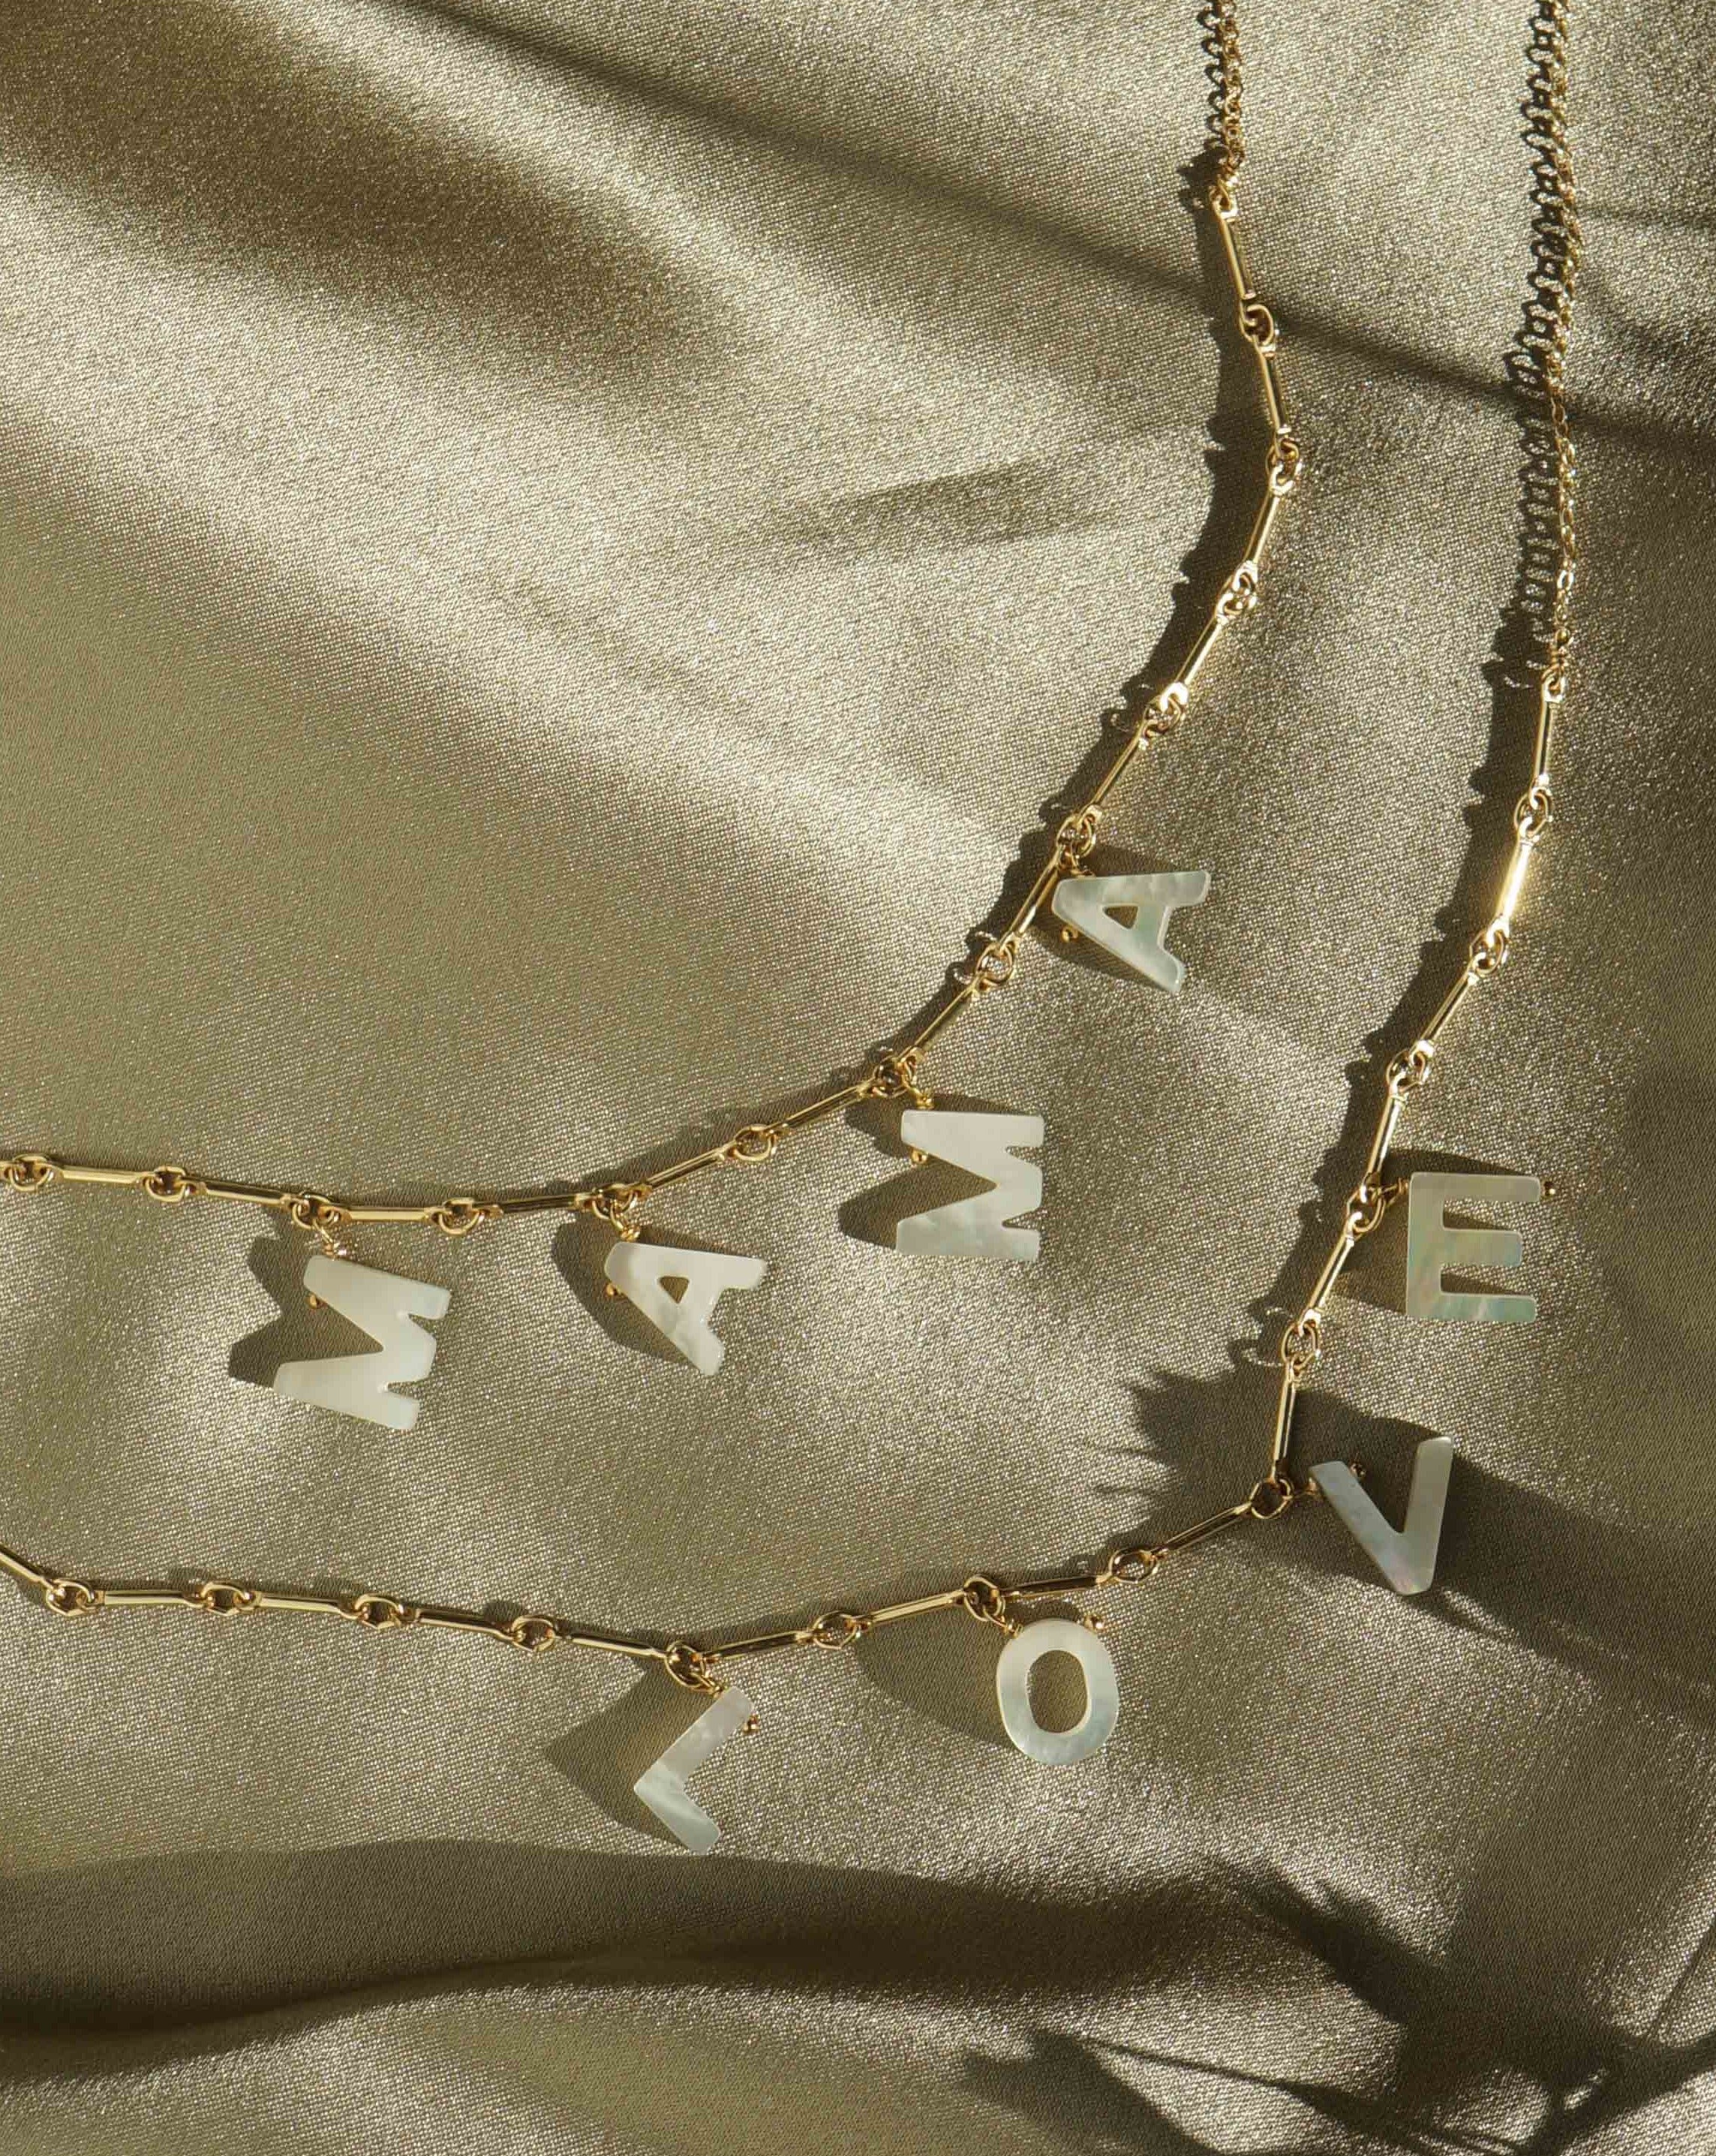 Mama Necklace by KOZAKH. A 16 to 18 inch adjustable length necklace with linked bar chain on bottom half and flat link chain on top half, crafted in 14K Gold Filled, featuring a customizable word made from hand carved Mother of Pearl letters.